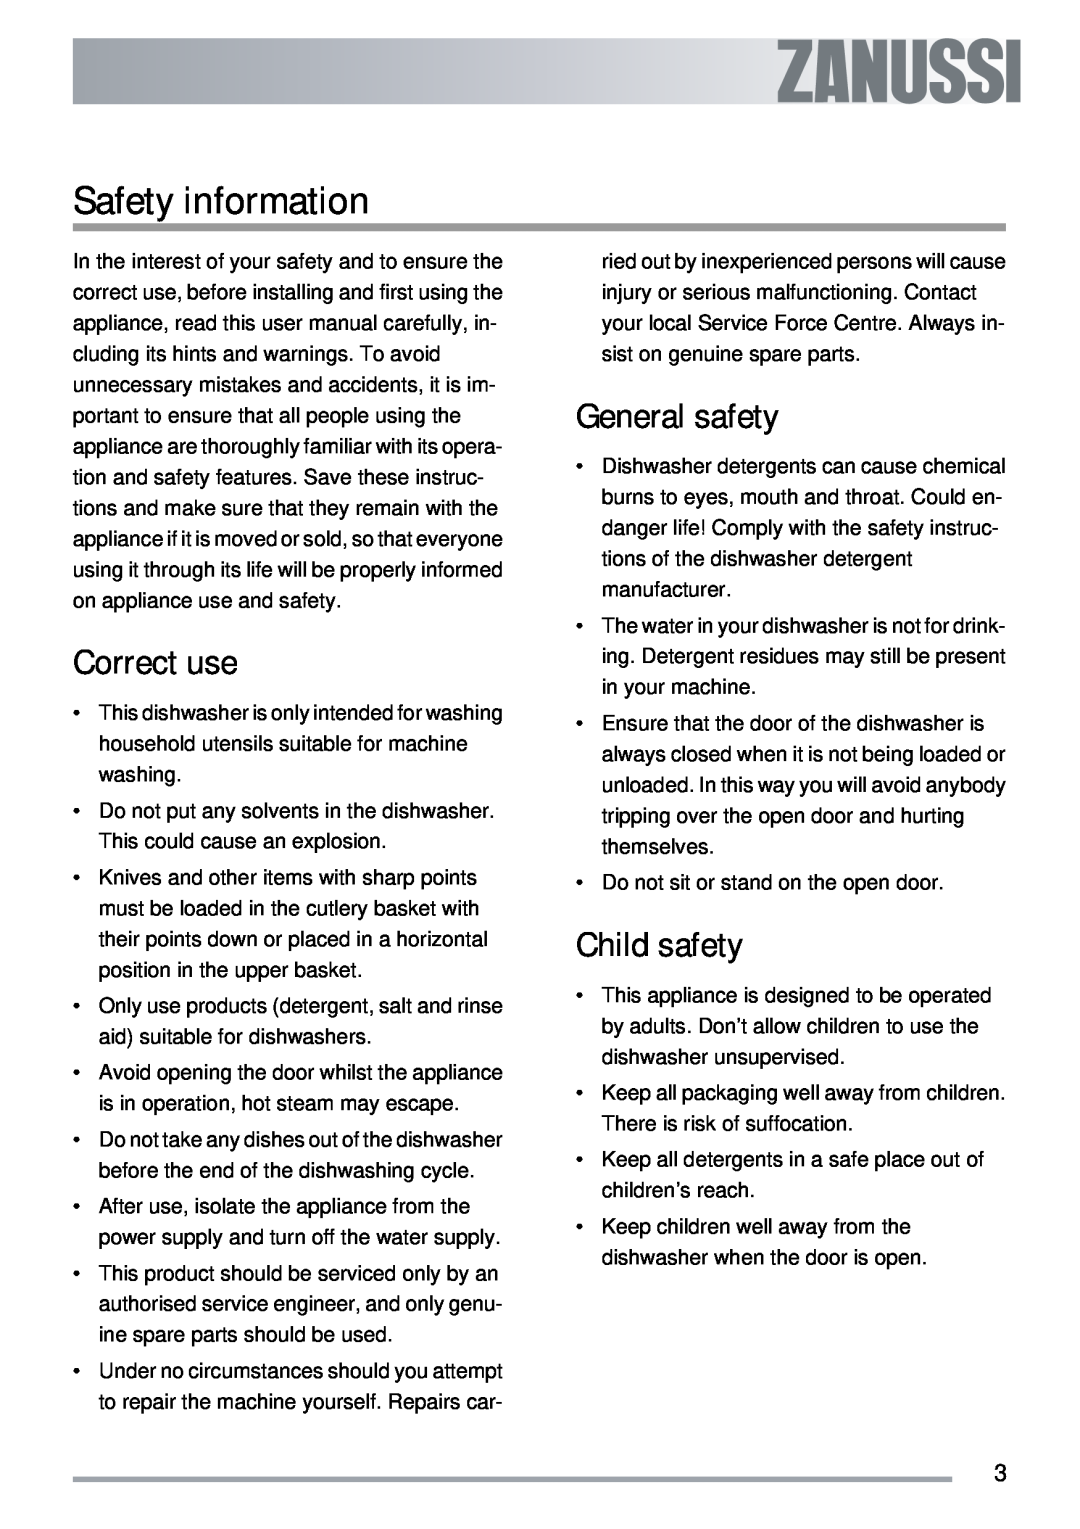 Zanussi ZDT40 user manual Safety information, Correct use, General safety, Child safety 